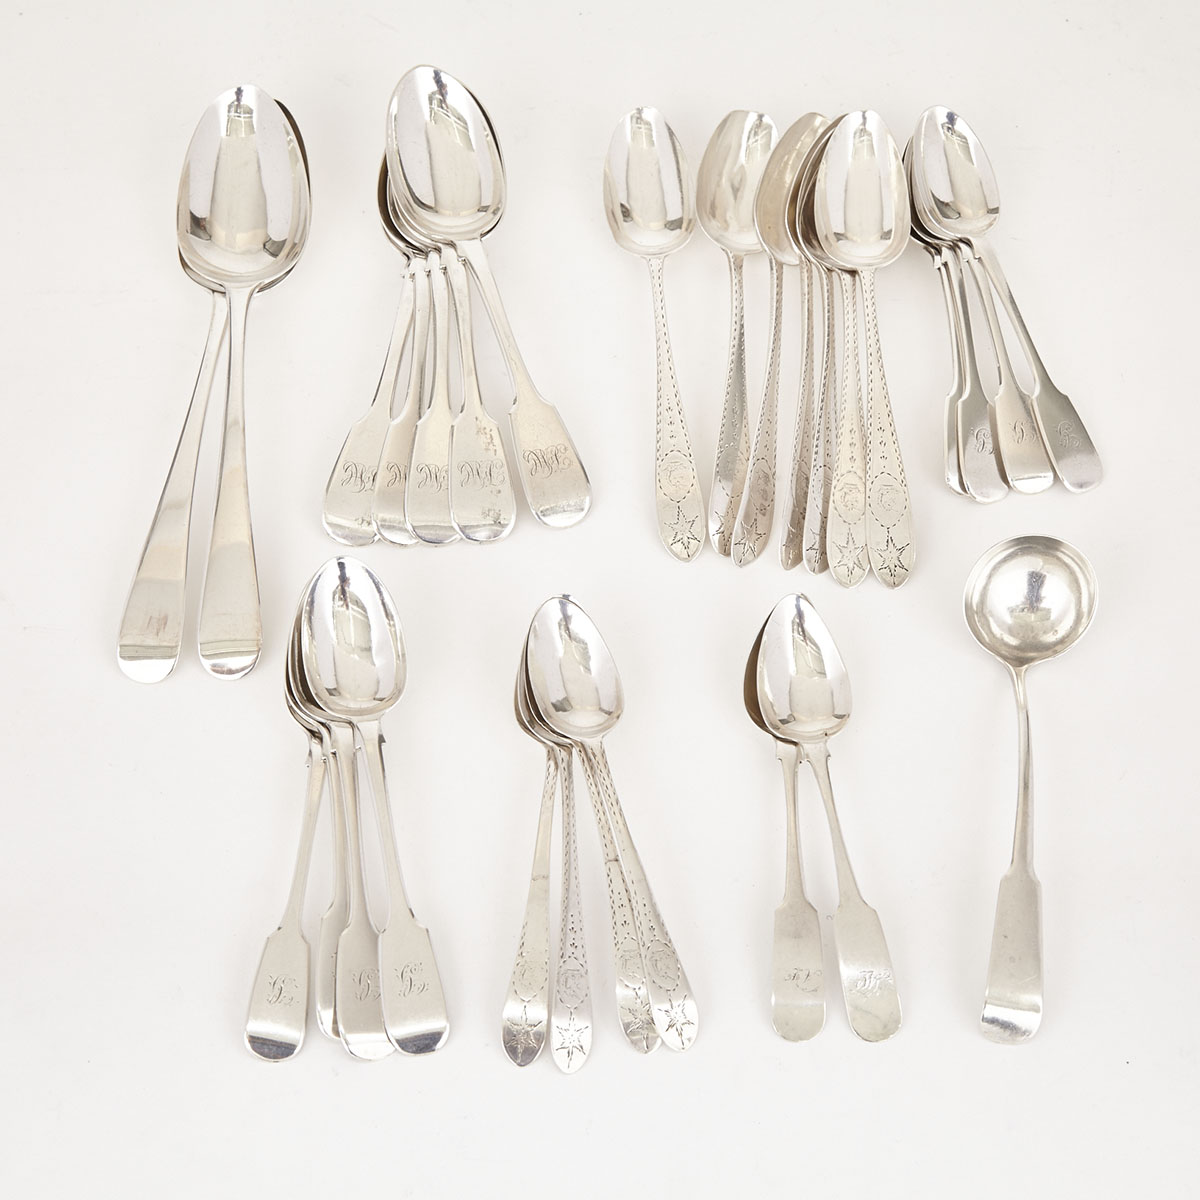 Grouped Lot of George III and Later Irish Silver Flatware, late 18th/19th century